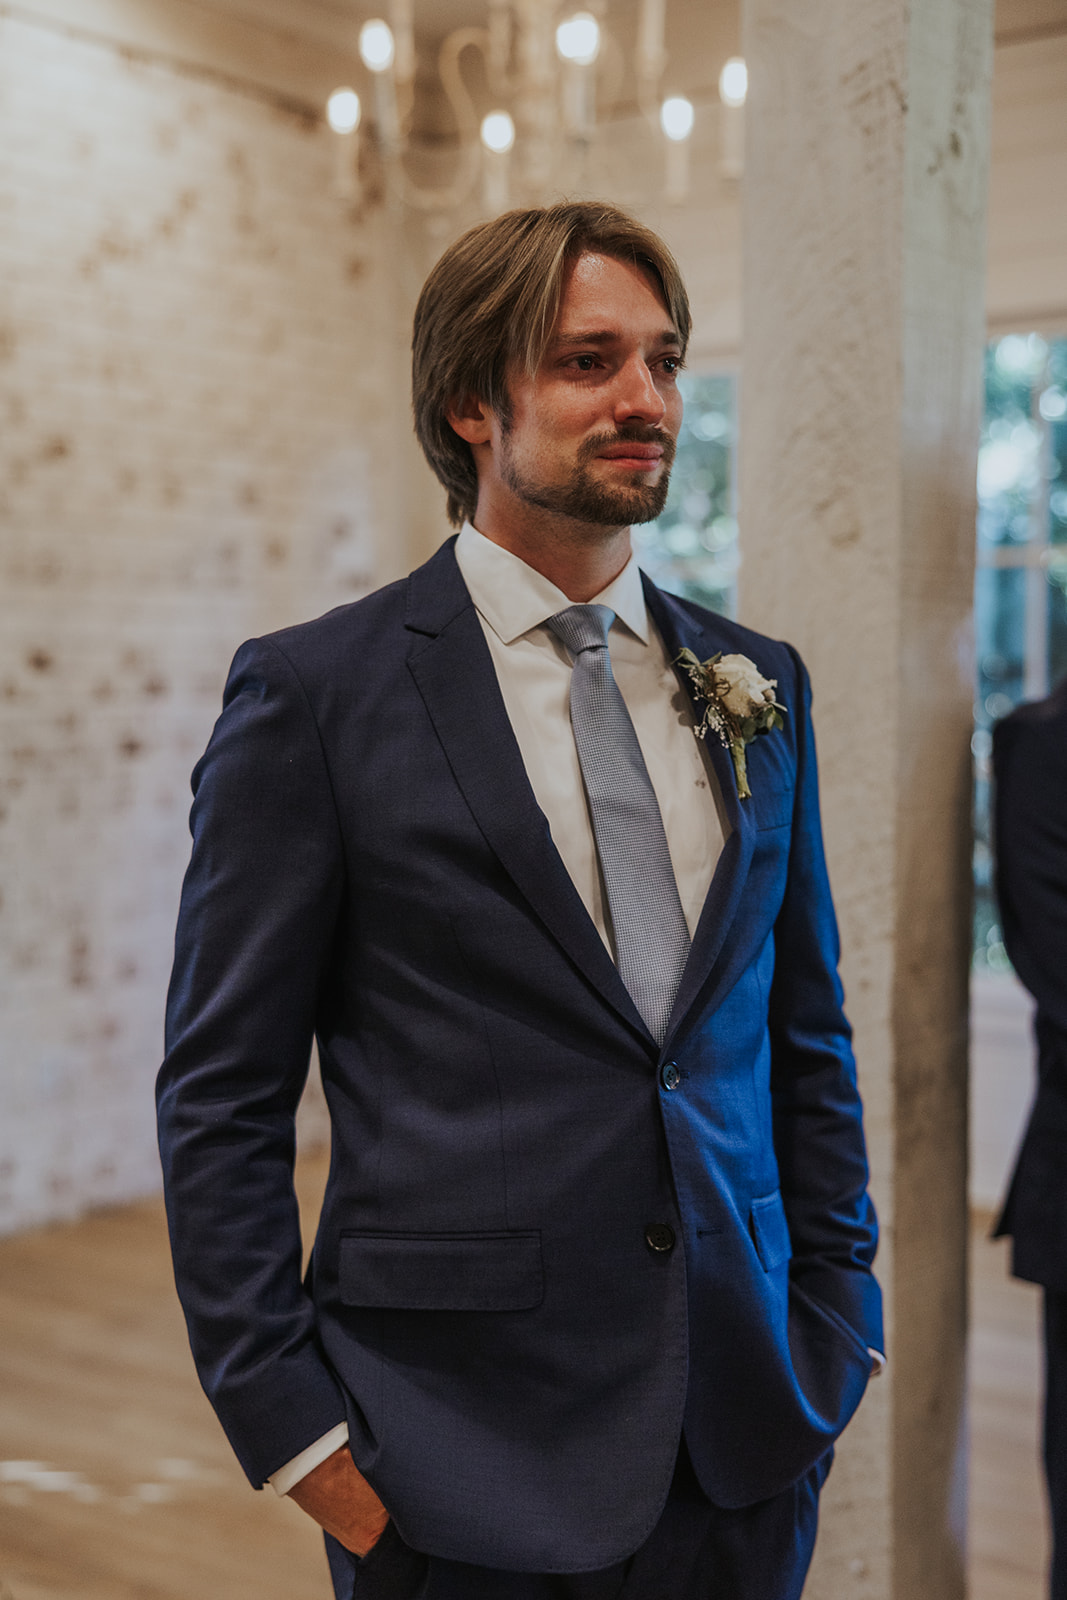 Handsome groom waits on his stunning bride to come down the aisle on their dreamy Georgia wedding day